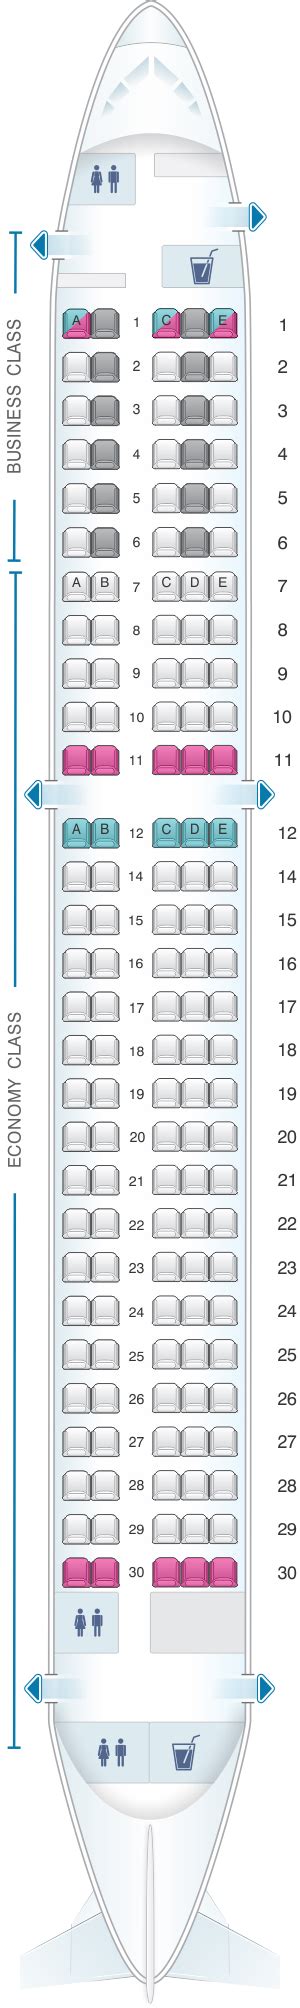 Airbus A220 Seat Map